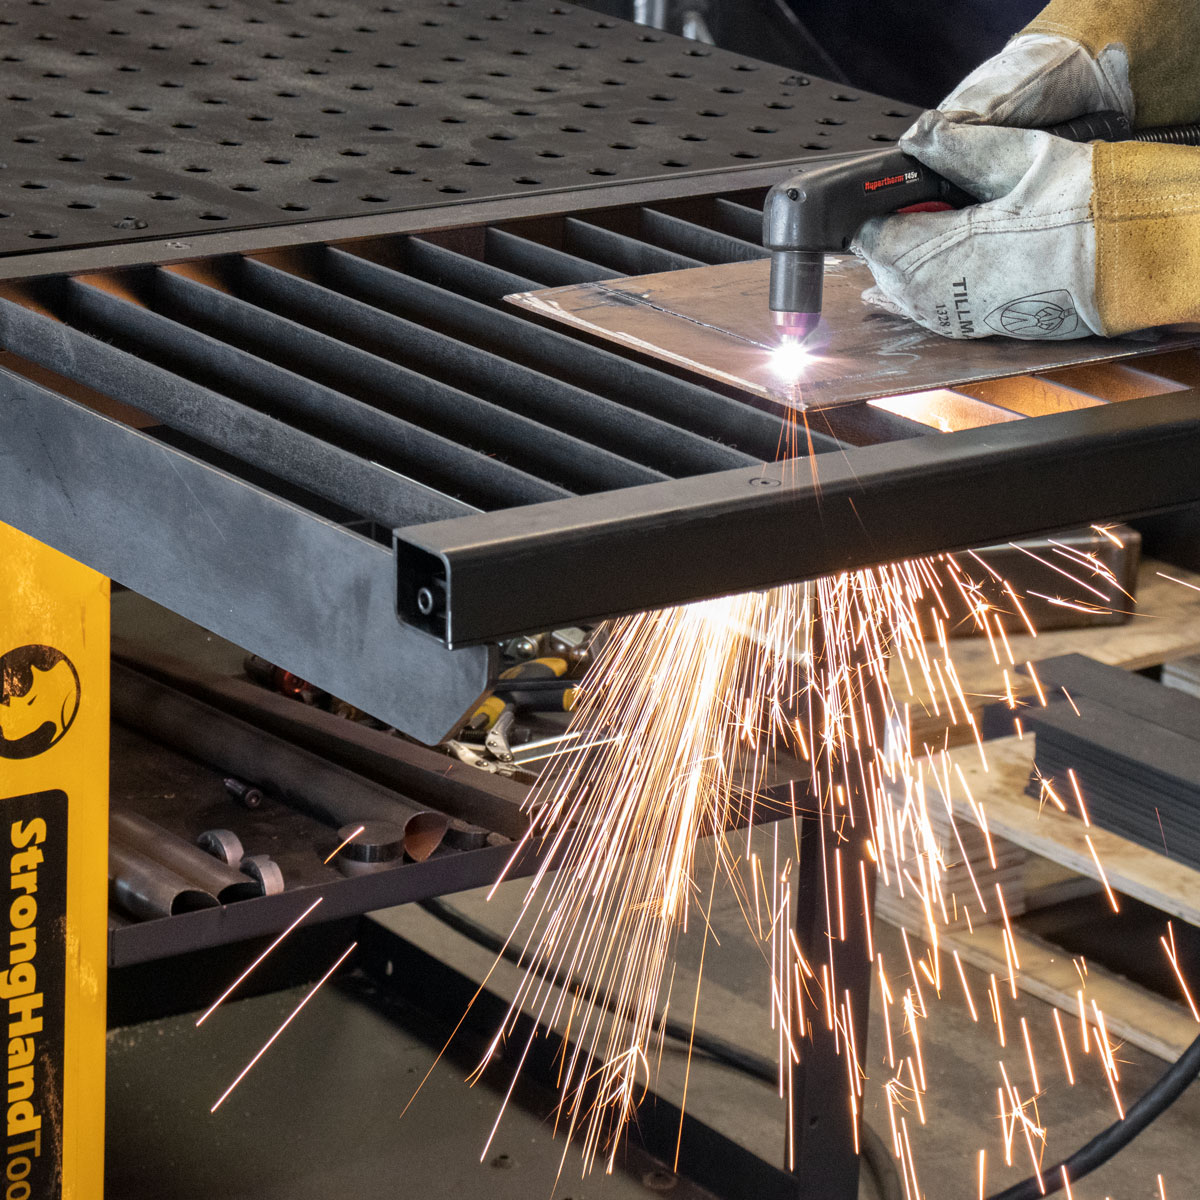 Optional Accessories The optional accessories attach to the Rhino Cart® for greater versatility in mobile or stationary cutting, welding and fabrication!